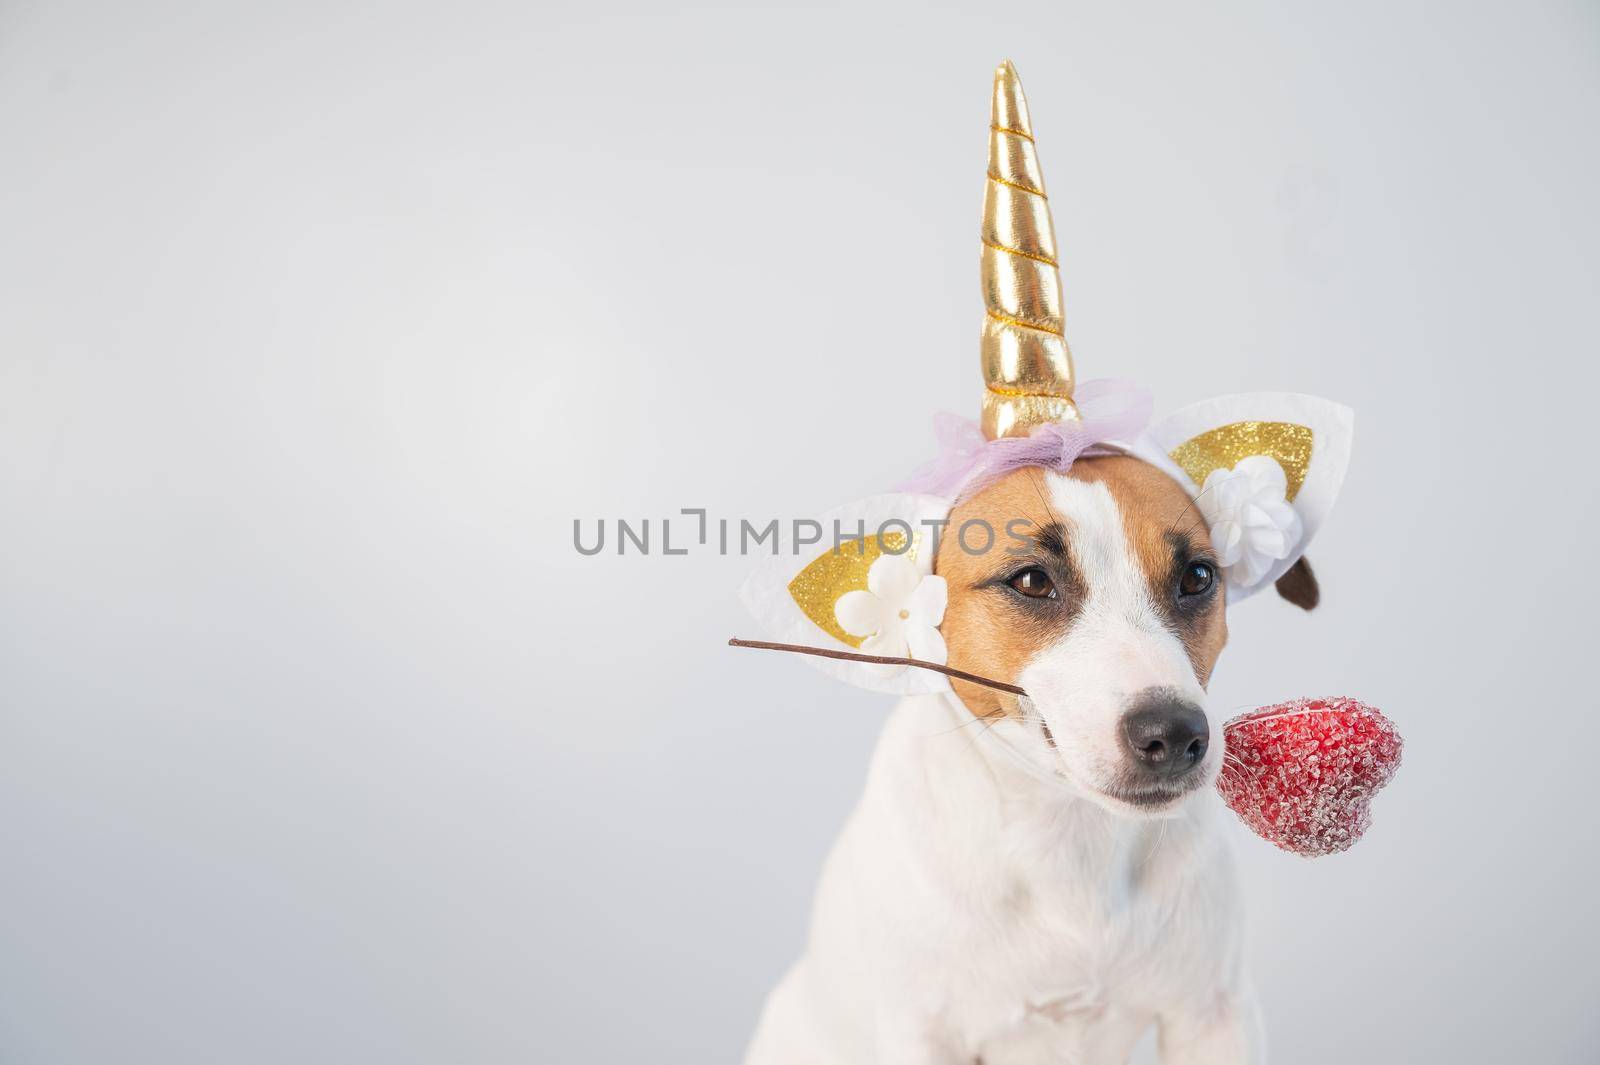 Cute jack russell terrier dog in a unicorn headband holding a heart on a white background. by mrwed54